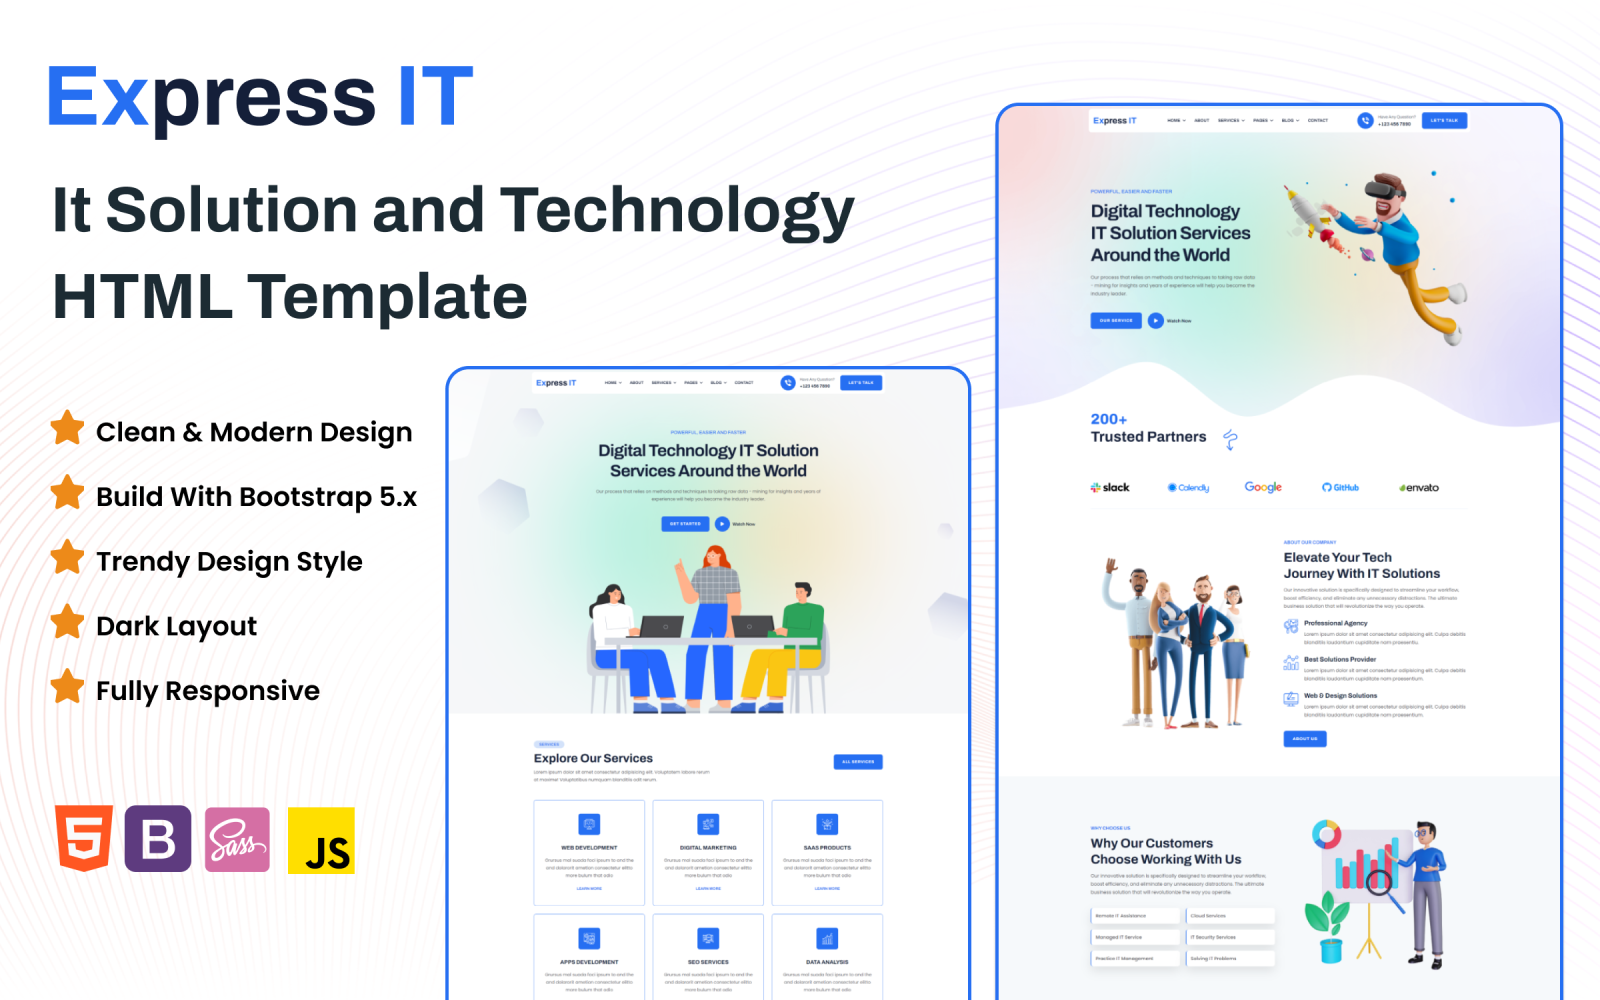 Express IT - It Solution and Technology HTML Template